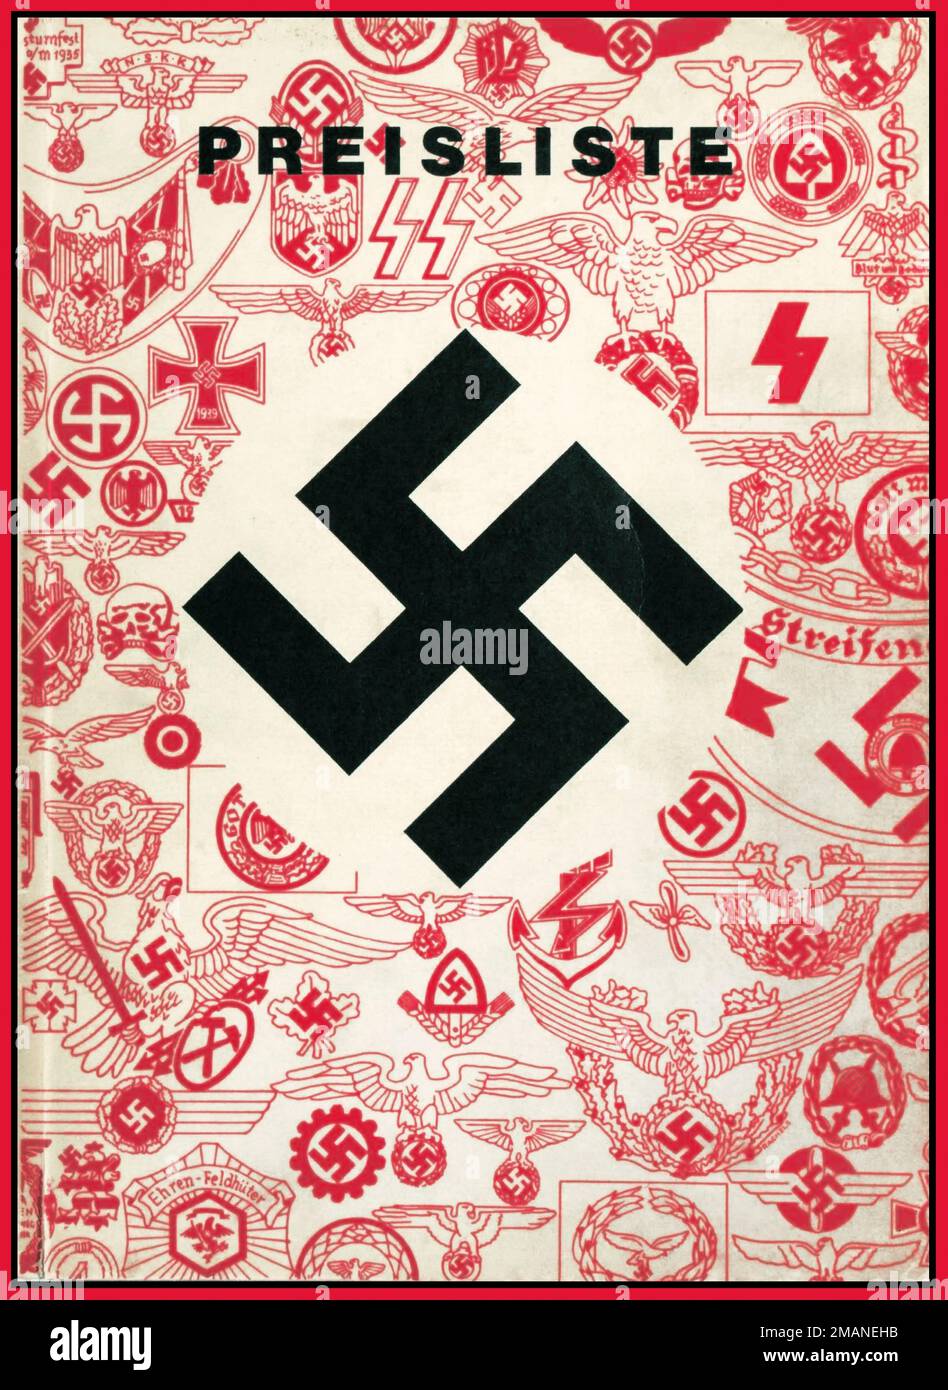 Nazi Germany 1930's Cover page from an official Nazi accessory product catalog published in Nazi Germany in the 1930s by F.W. Assmann & Söhne, a insignia and uniform metal accessory maker in Lüdenscheid, Germany. The company produced Uniformknöpfe, Orden, Abzeichen, Beschläge, Koppelschlösser und Schnallen, i. e. uniform buttons, orders/decorations, insignia/emblems/badges, metal fittings, belt buckles, etc. PREISLISTE (Price list) Front cover showing a Nazi swastika surrounded by images of pieces made by the firm Stock Photo